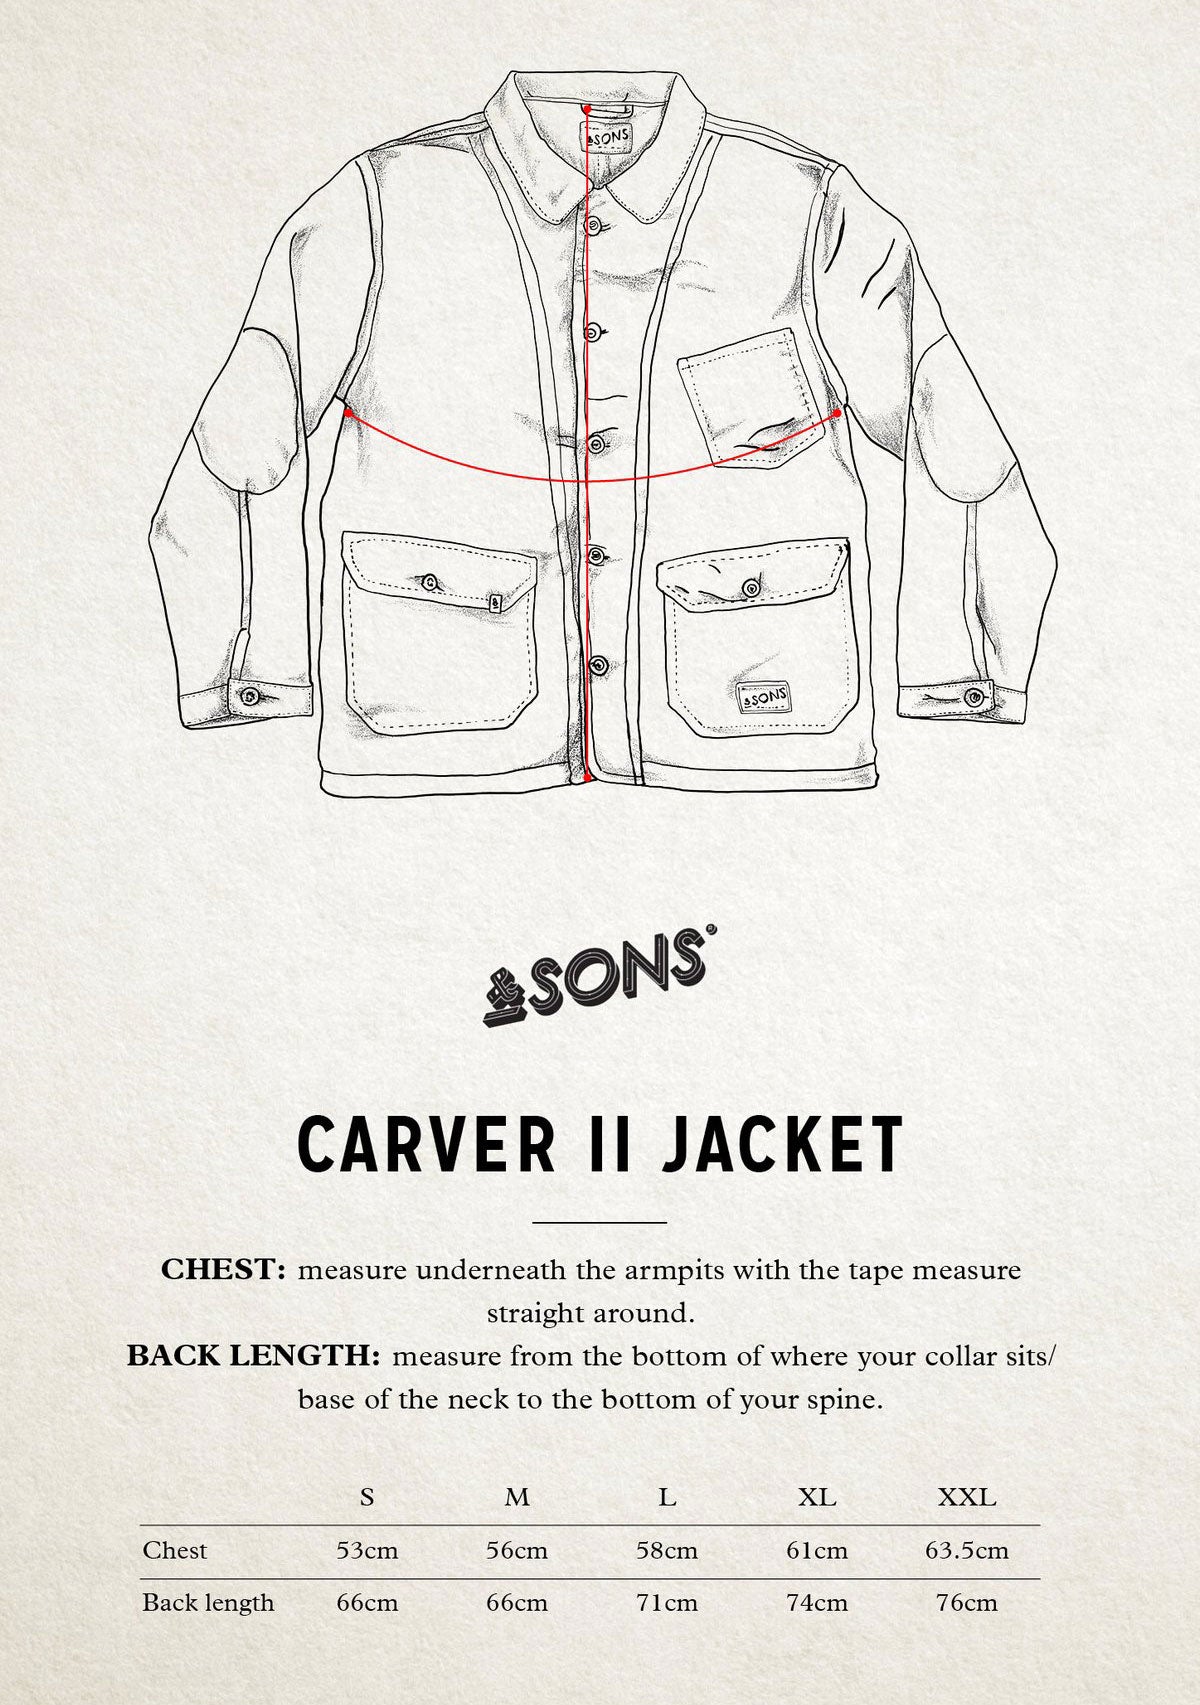 &SONS Carver II Jacket Size Guide